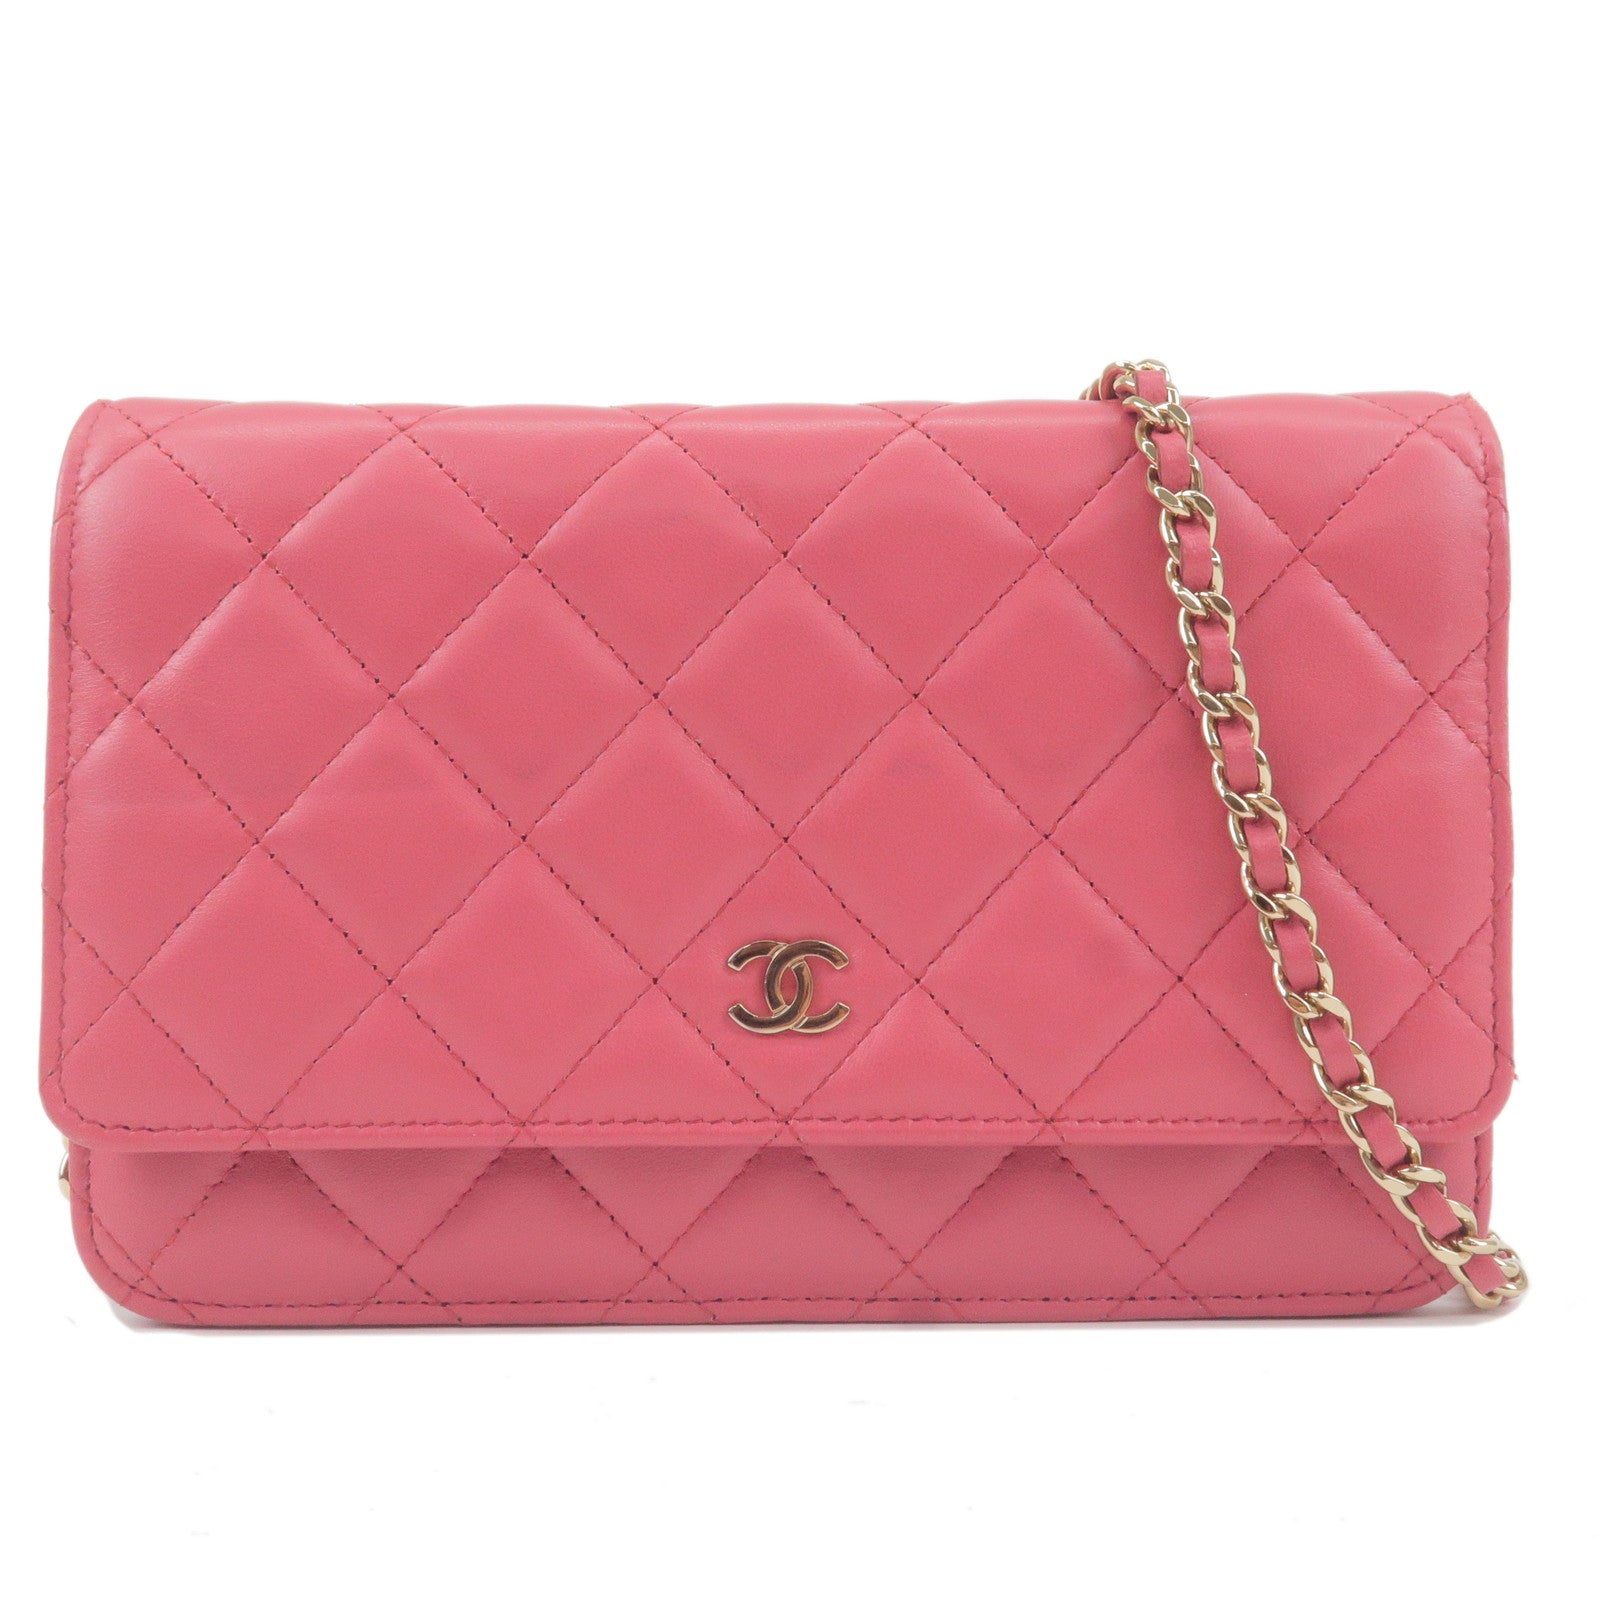 Matelasse - A33814 – dct - Bag - CHANEL - ep_vintage luxury Store